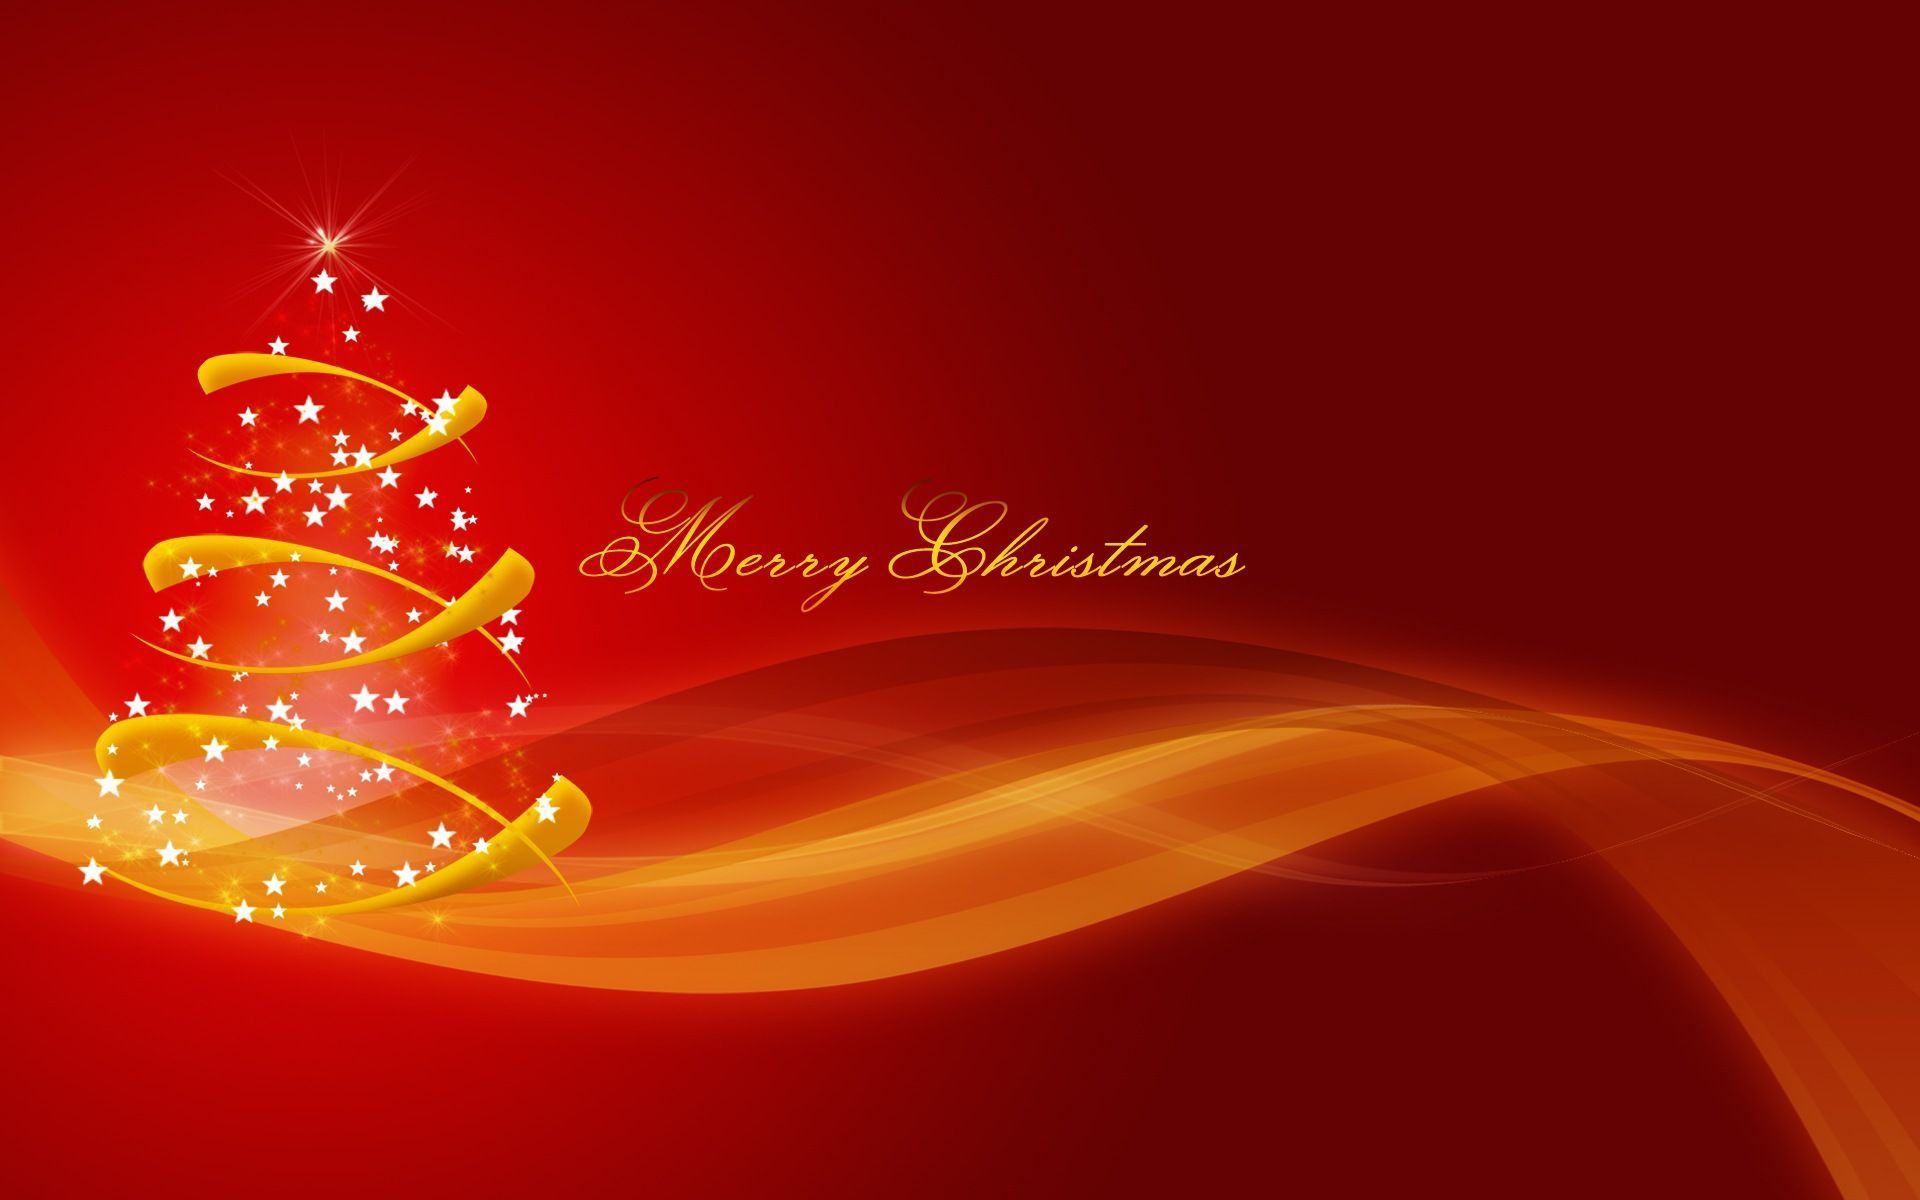 Merry Christmas wallpapers red 2015 free download Wallpapers